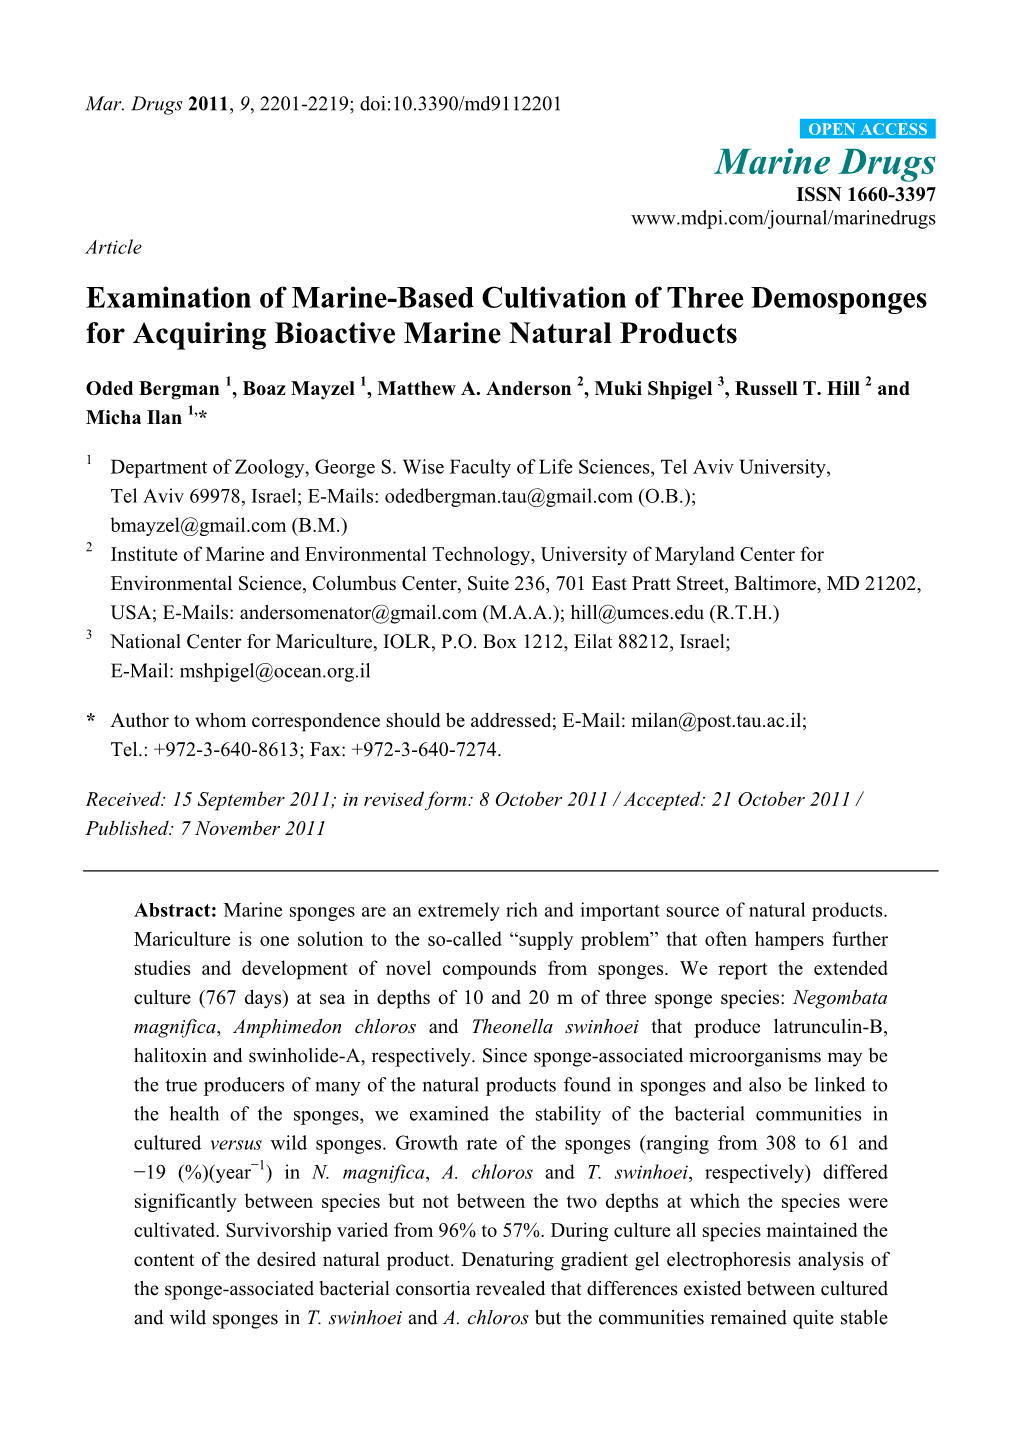 Examination of Marine-Based Cultivation of Three Demosponges for Acquiring Bioactive Marine Natural Products